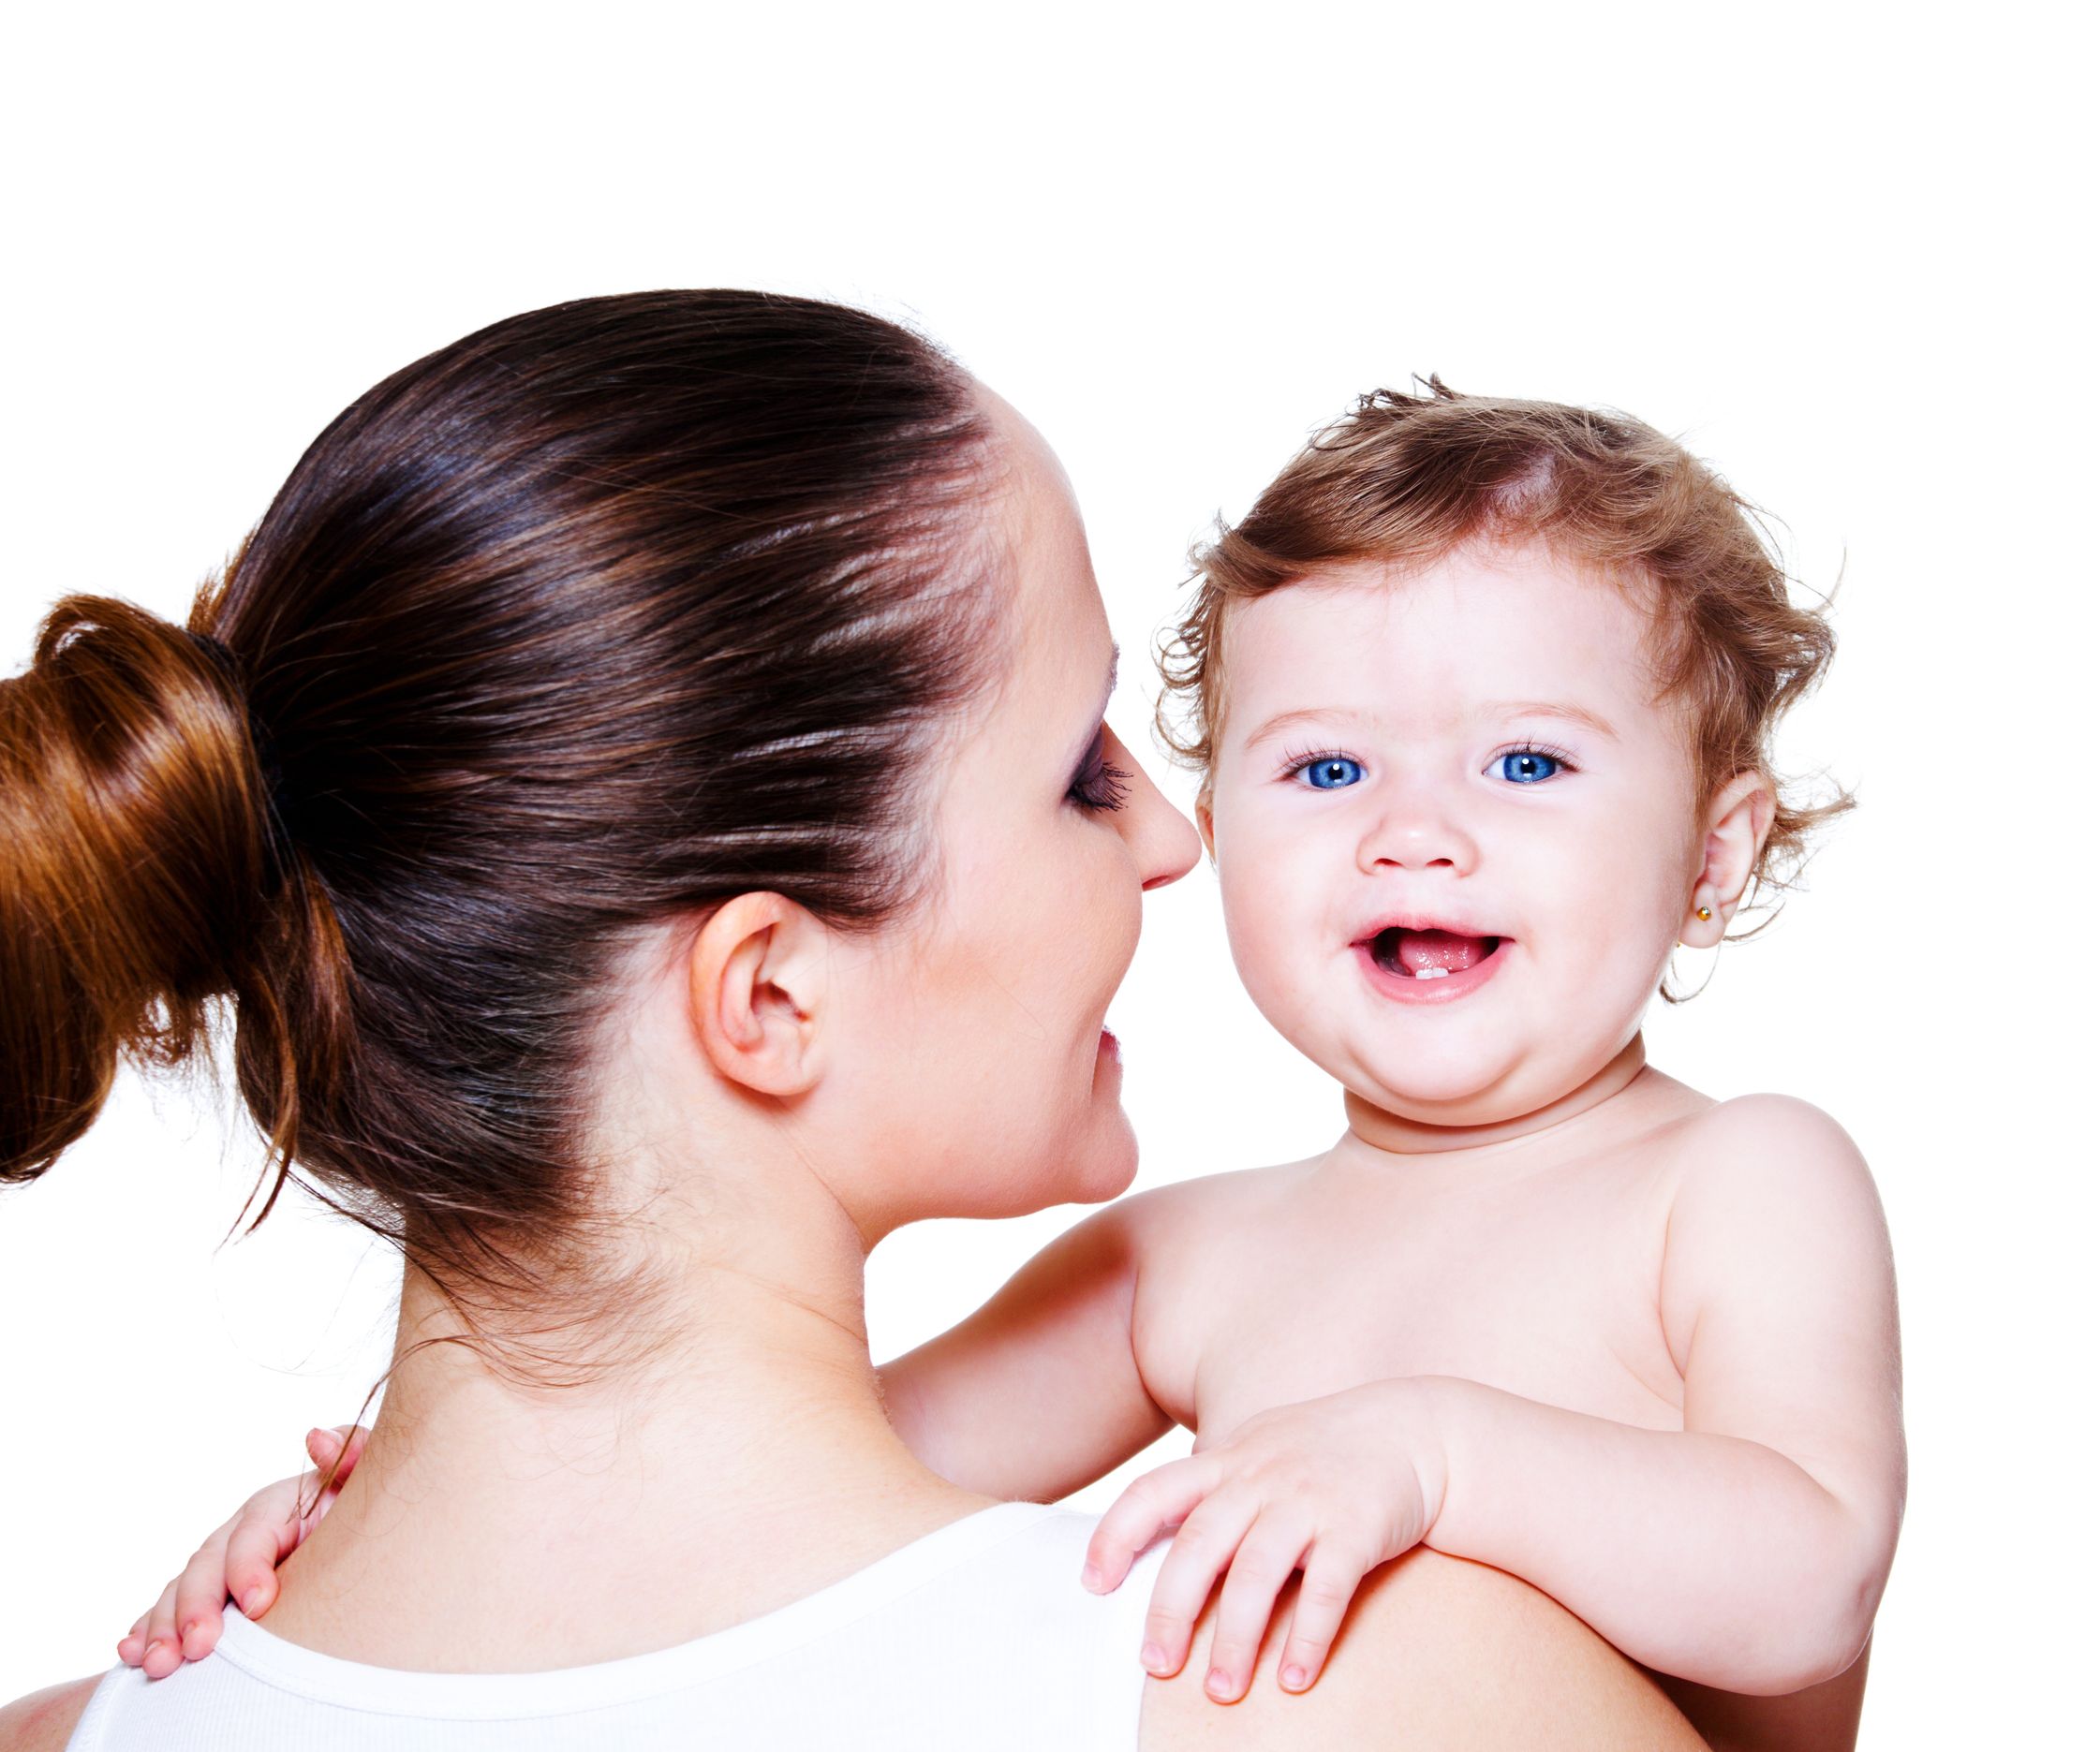 The Key Things You Need to Know About Being a Surrogate Mother